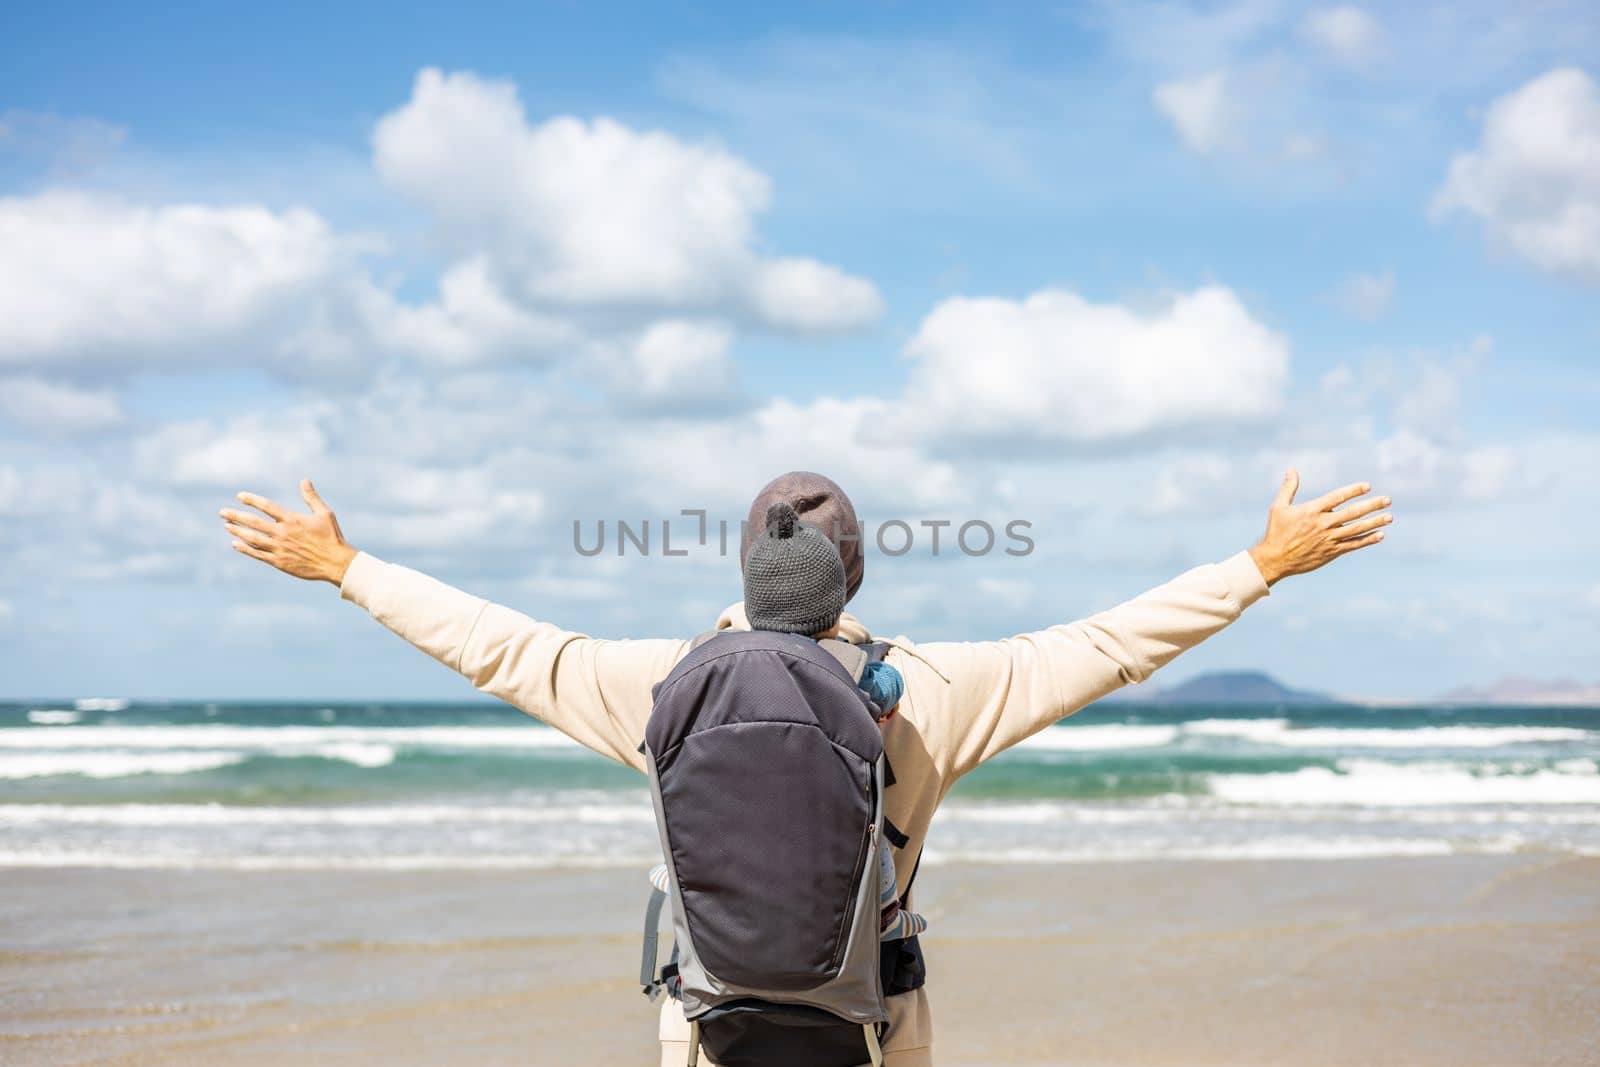 Young father rising hands to the sky while enjoying pure nature carrying his infant baby boy son in backpack on windy sandy beach of Famara, Lanzarote island, Spain. Family travel concept